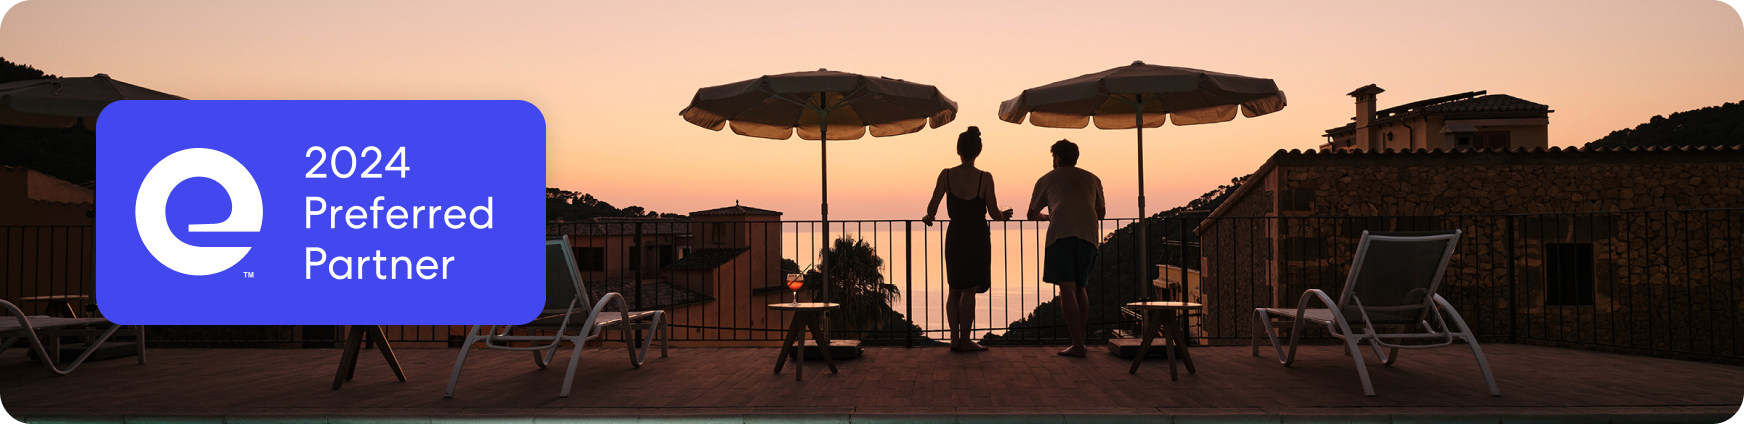 Expedia Preferred Partnership logo on image of couple in italy on balcony with sunset.